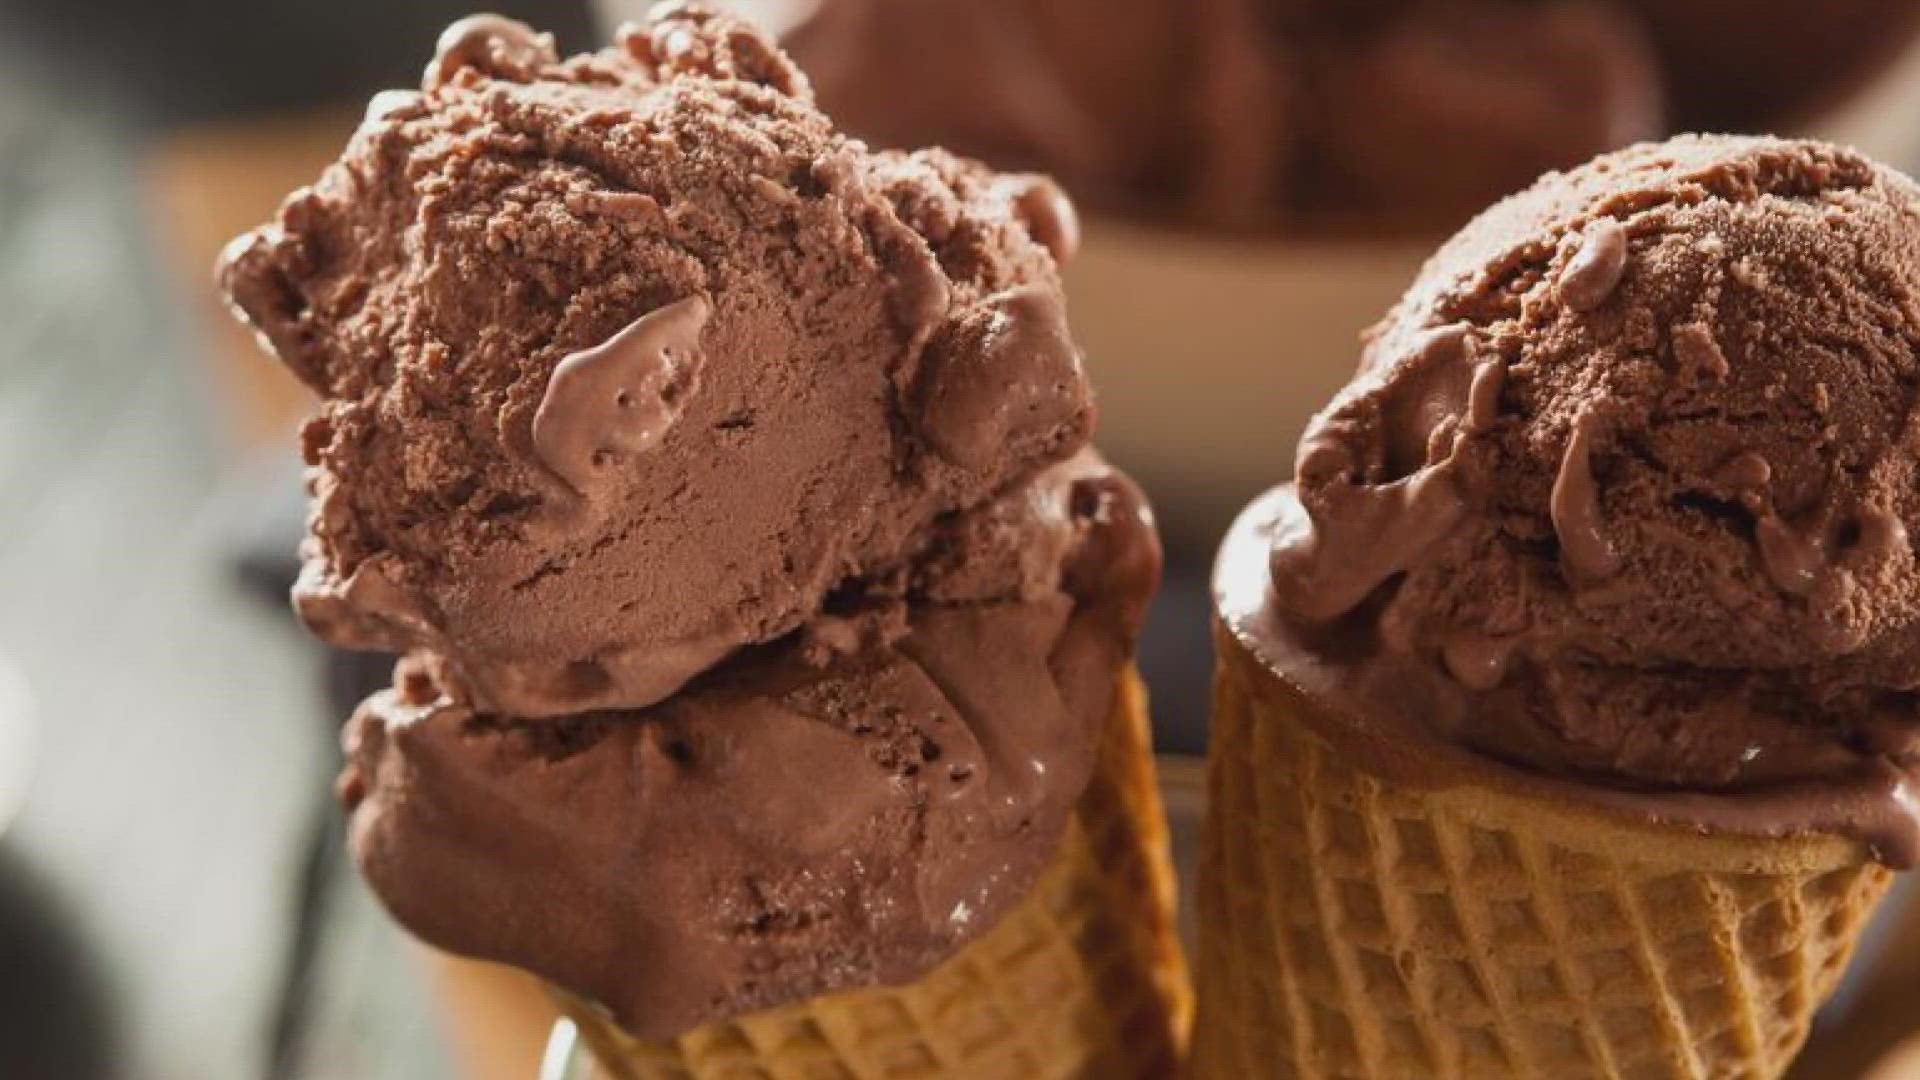 The first annual Scooped! Ice Cream Festival is coming to Seattle Center this weekend